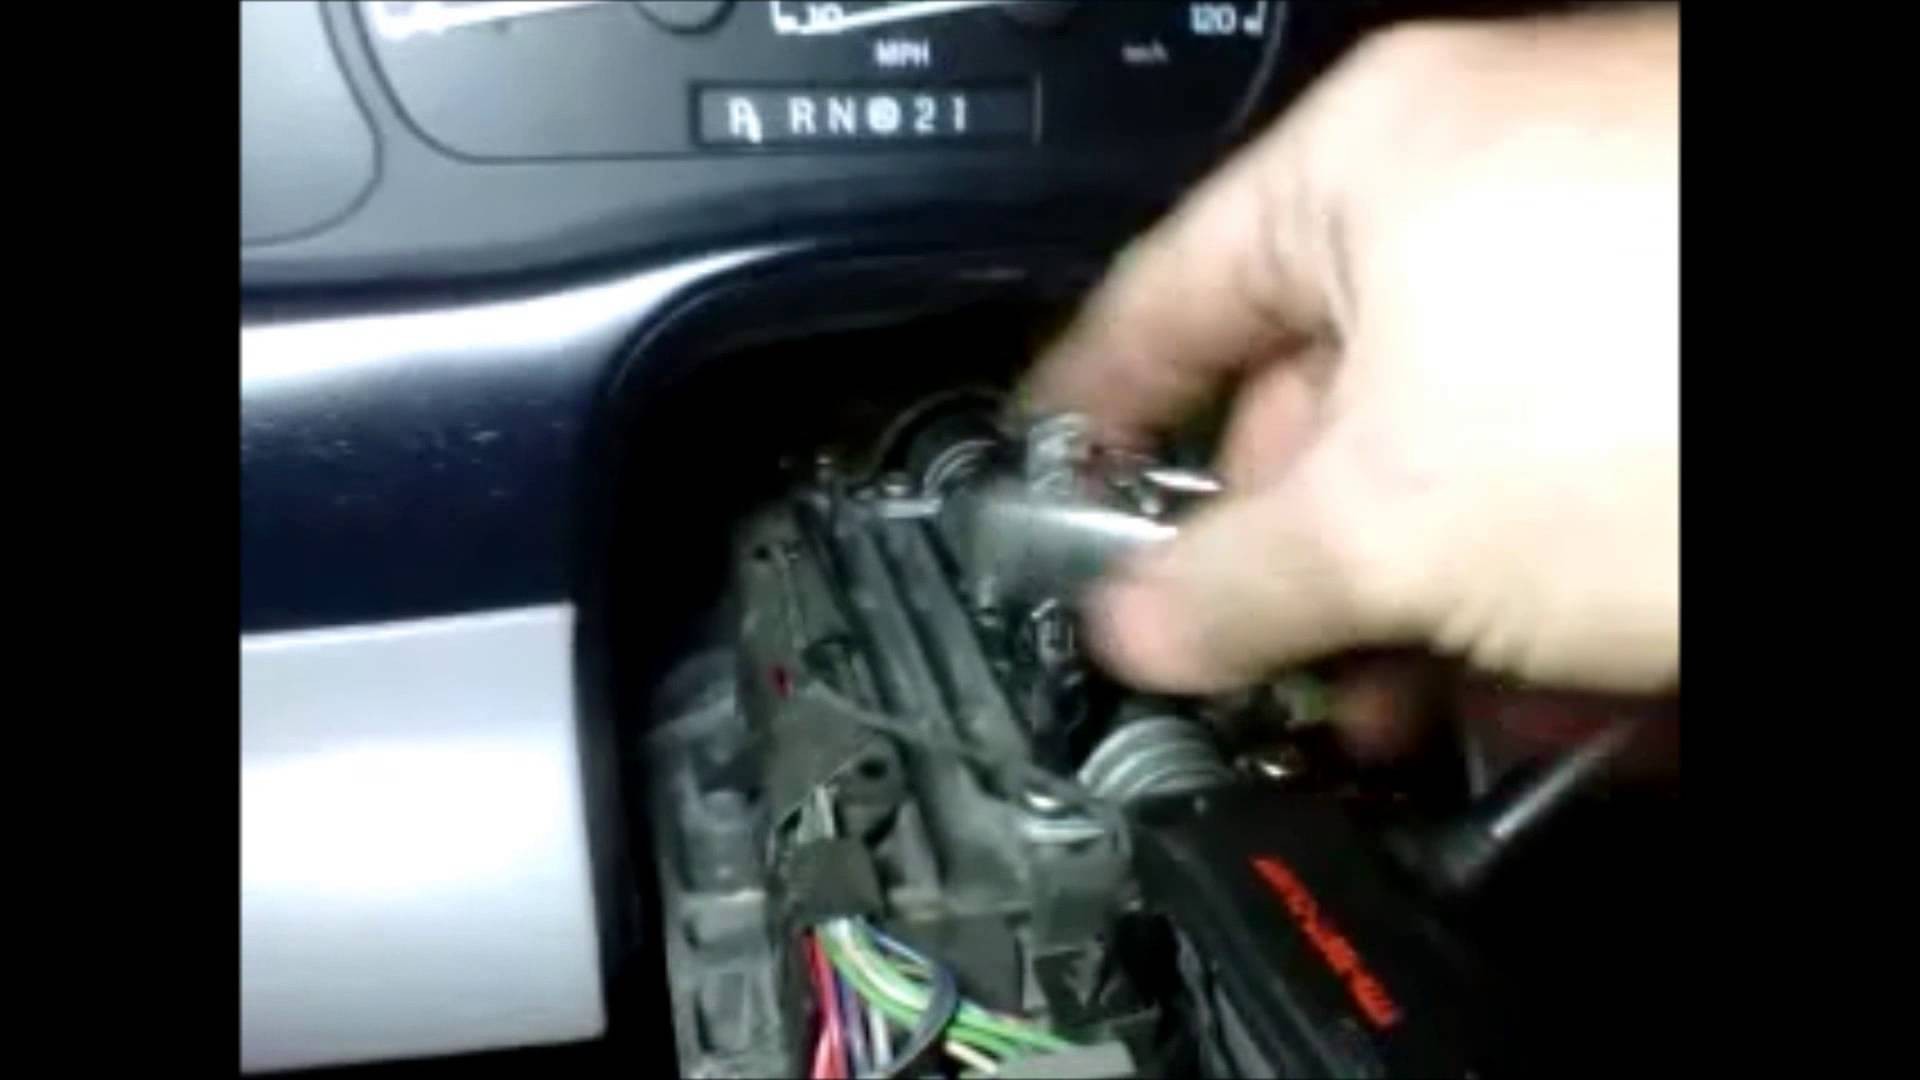 2000 ford Explorer Engine Diagram Repairing A Sloppy Automatic Shifter In A ford Explorer Of 2000 ford Explorer Engine Diagram